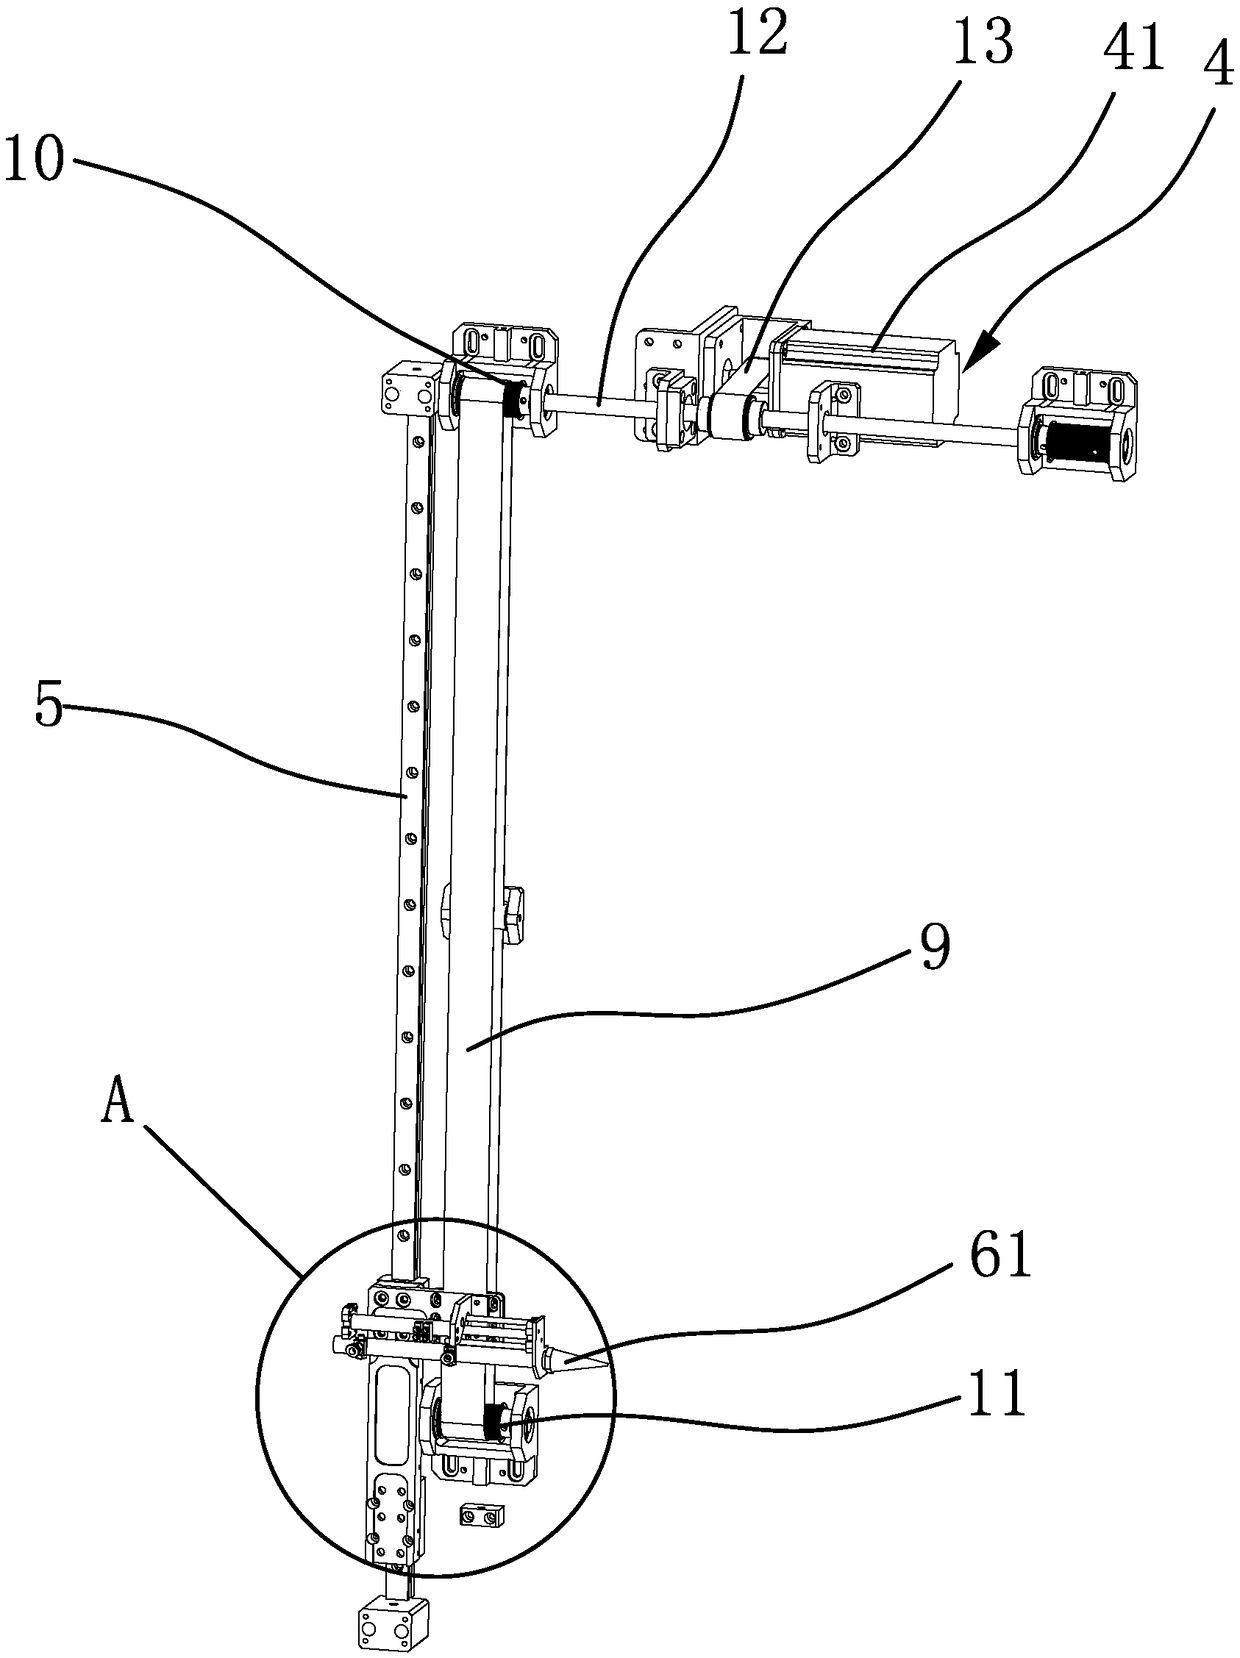 Filter barrel assembly structure of purifier